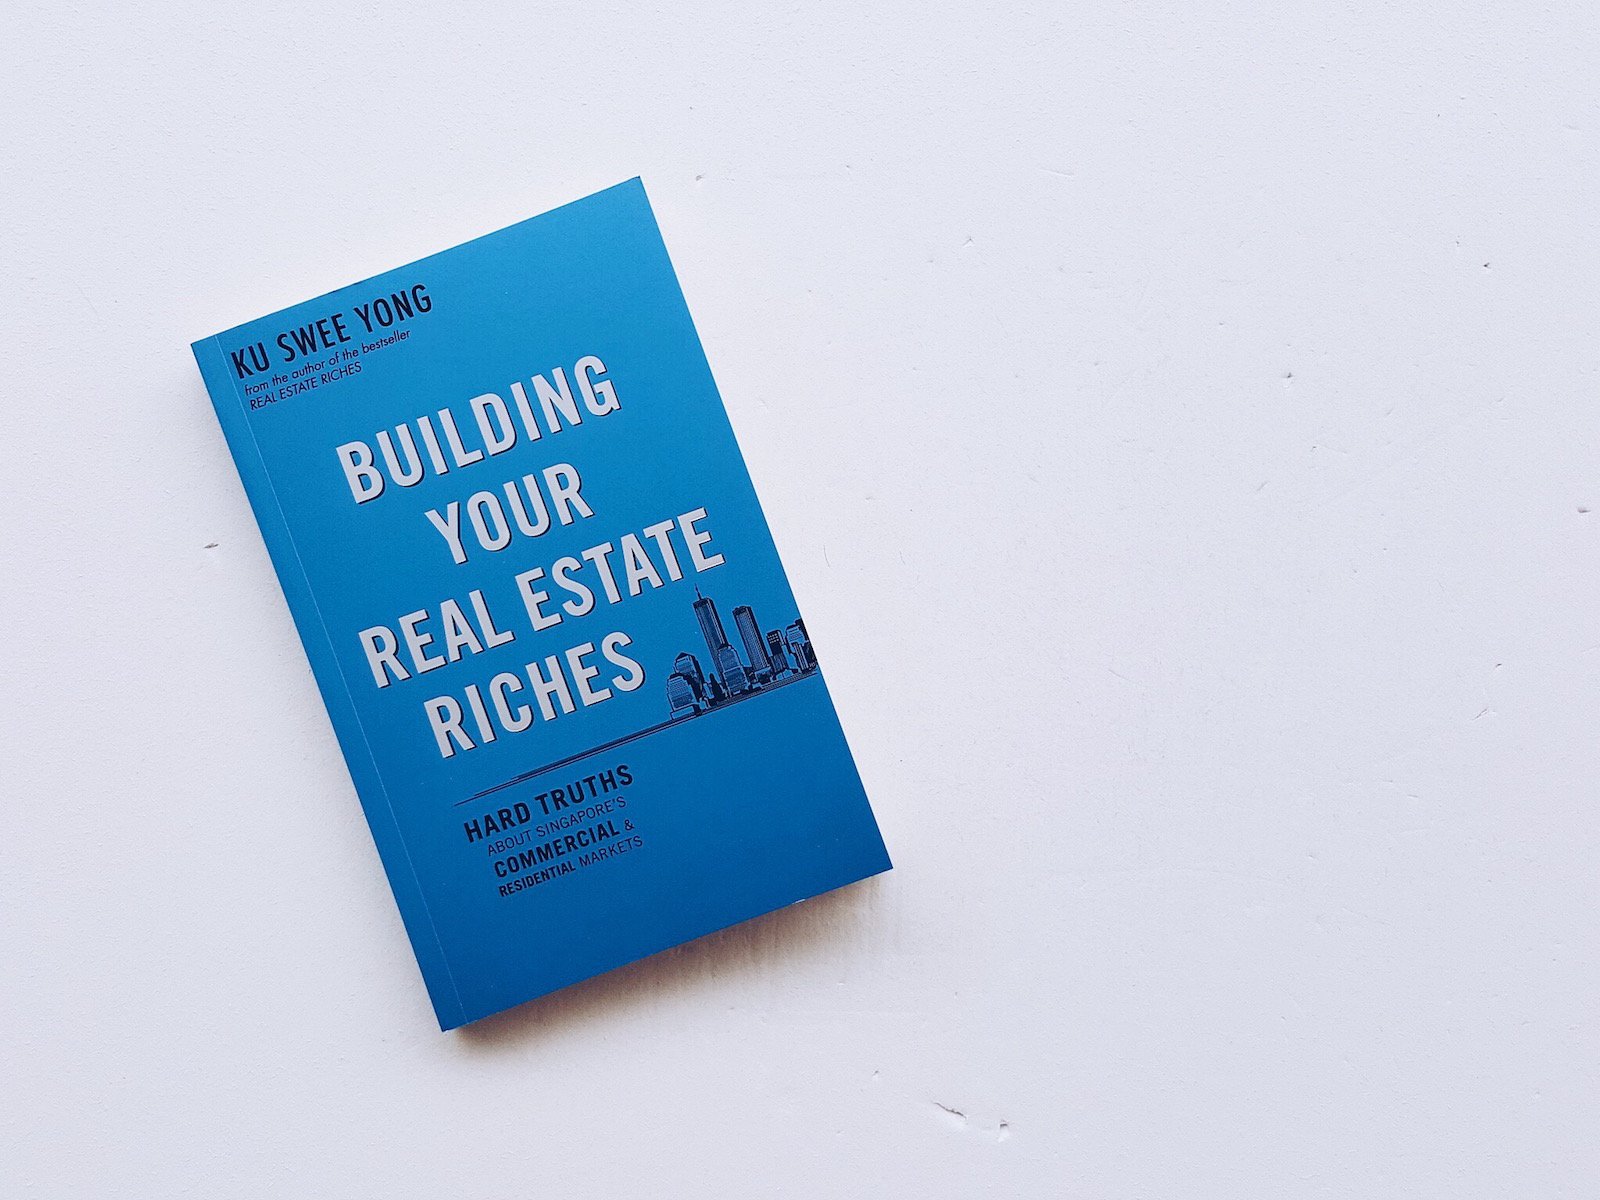 Building Your Real Estate Riches